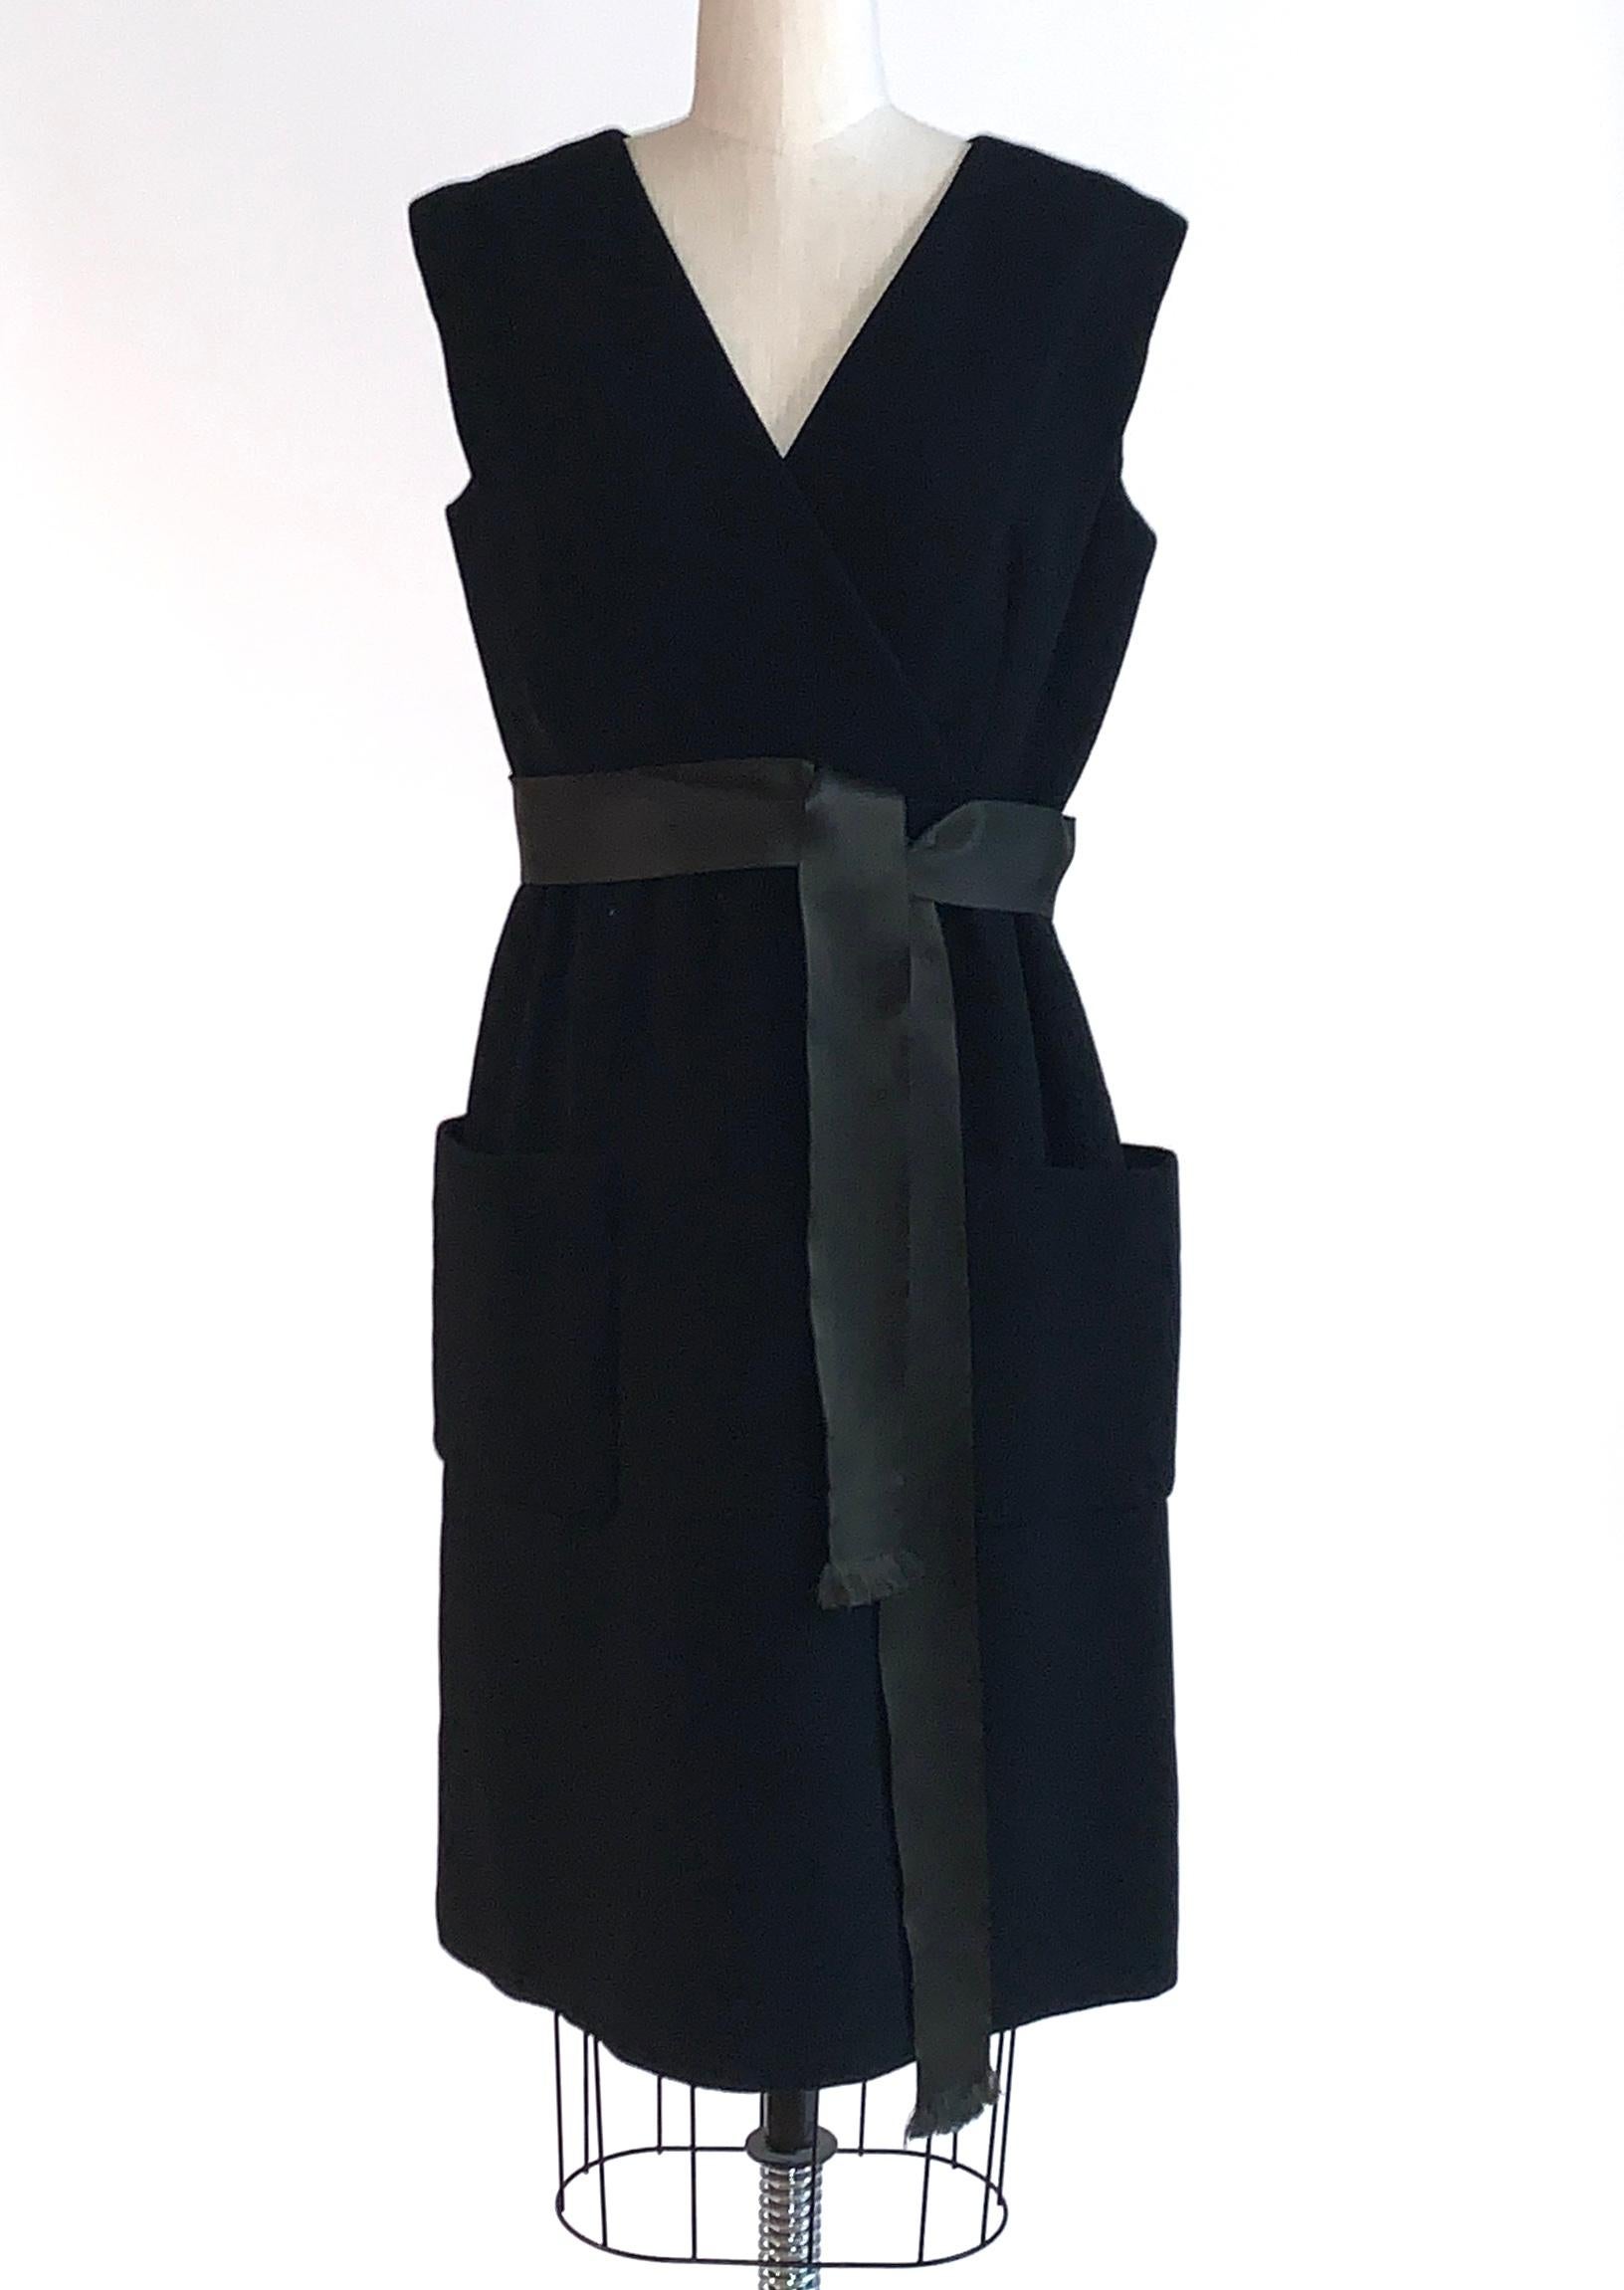 Vintage Norman Norell 1960s sleeveless little black dress with patch pockets at sides and ribbon sash at waist. crossover v neck detail at bust, and buttons up back of dress from middle. Keystone dress shields at inner underarms. 

Labelled Norman